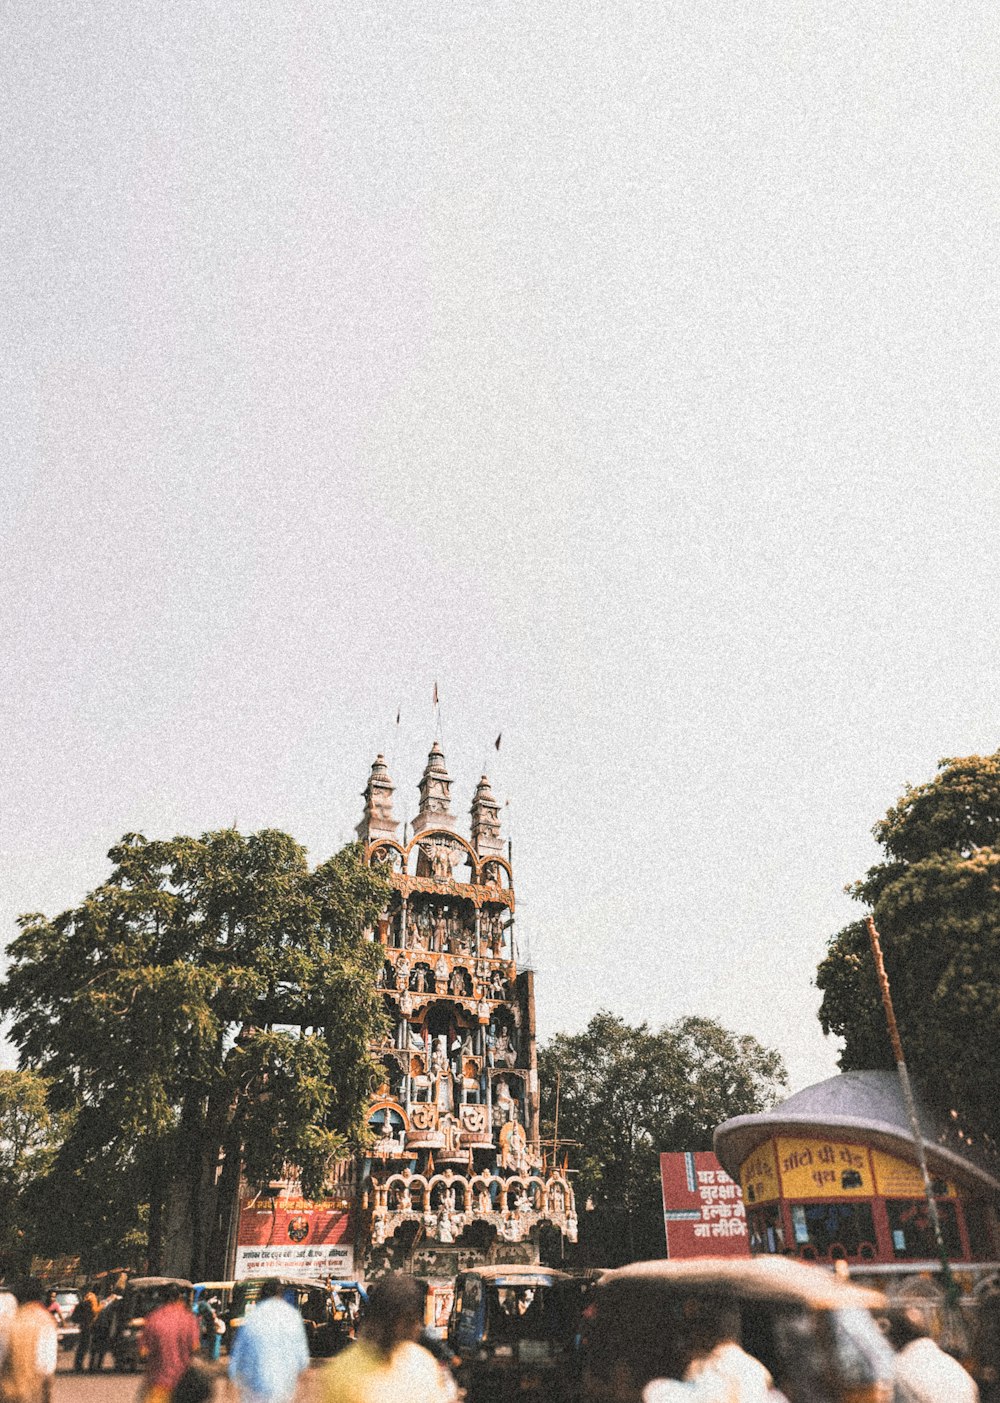 a tall tower with many spires on top of it